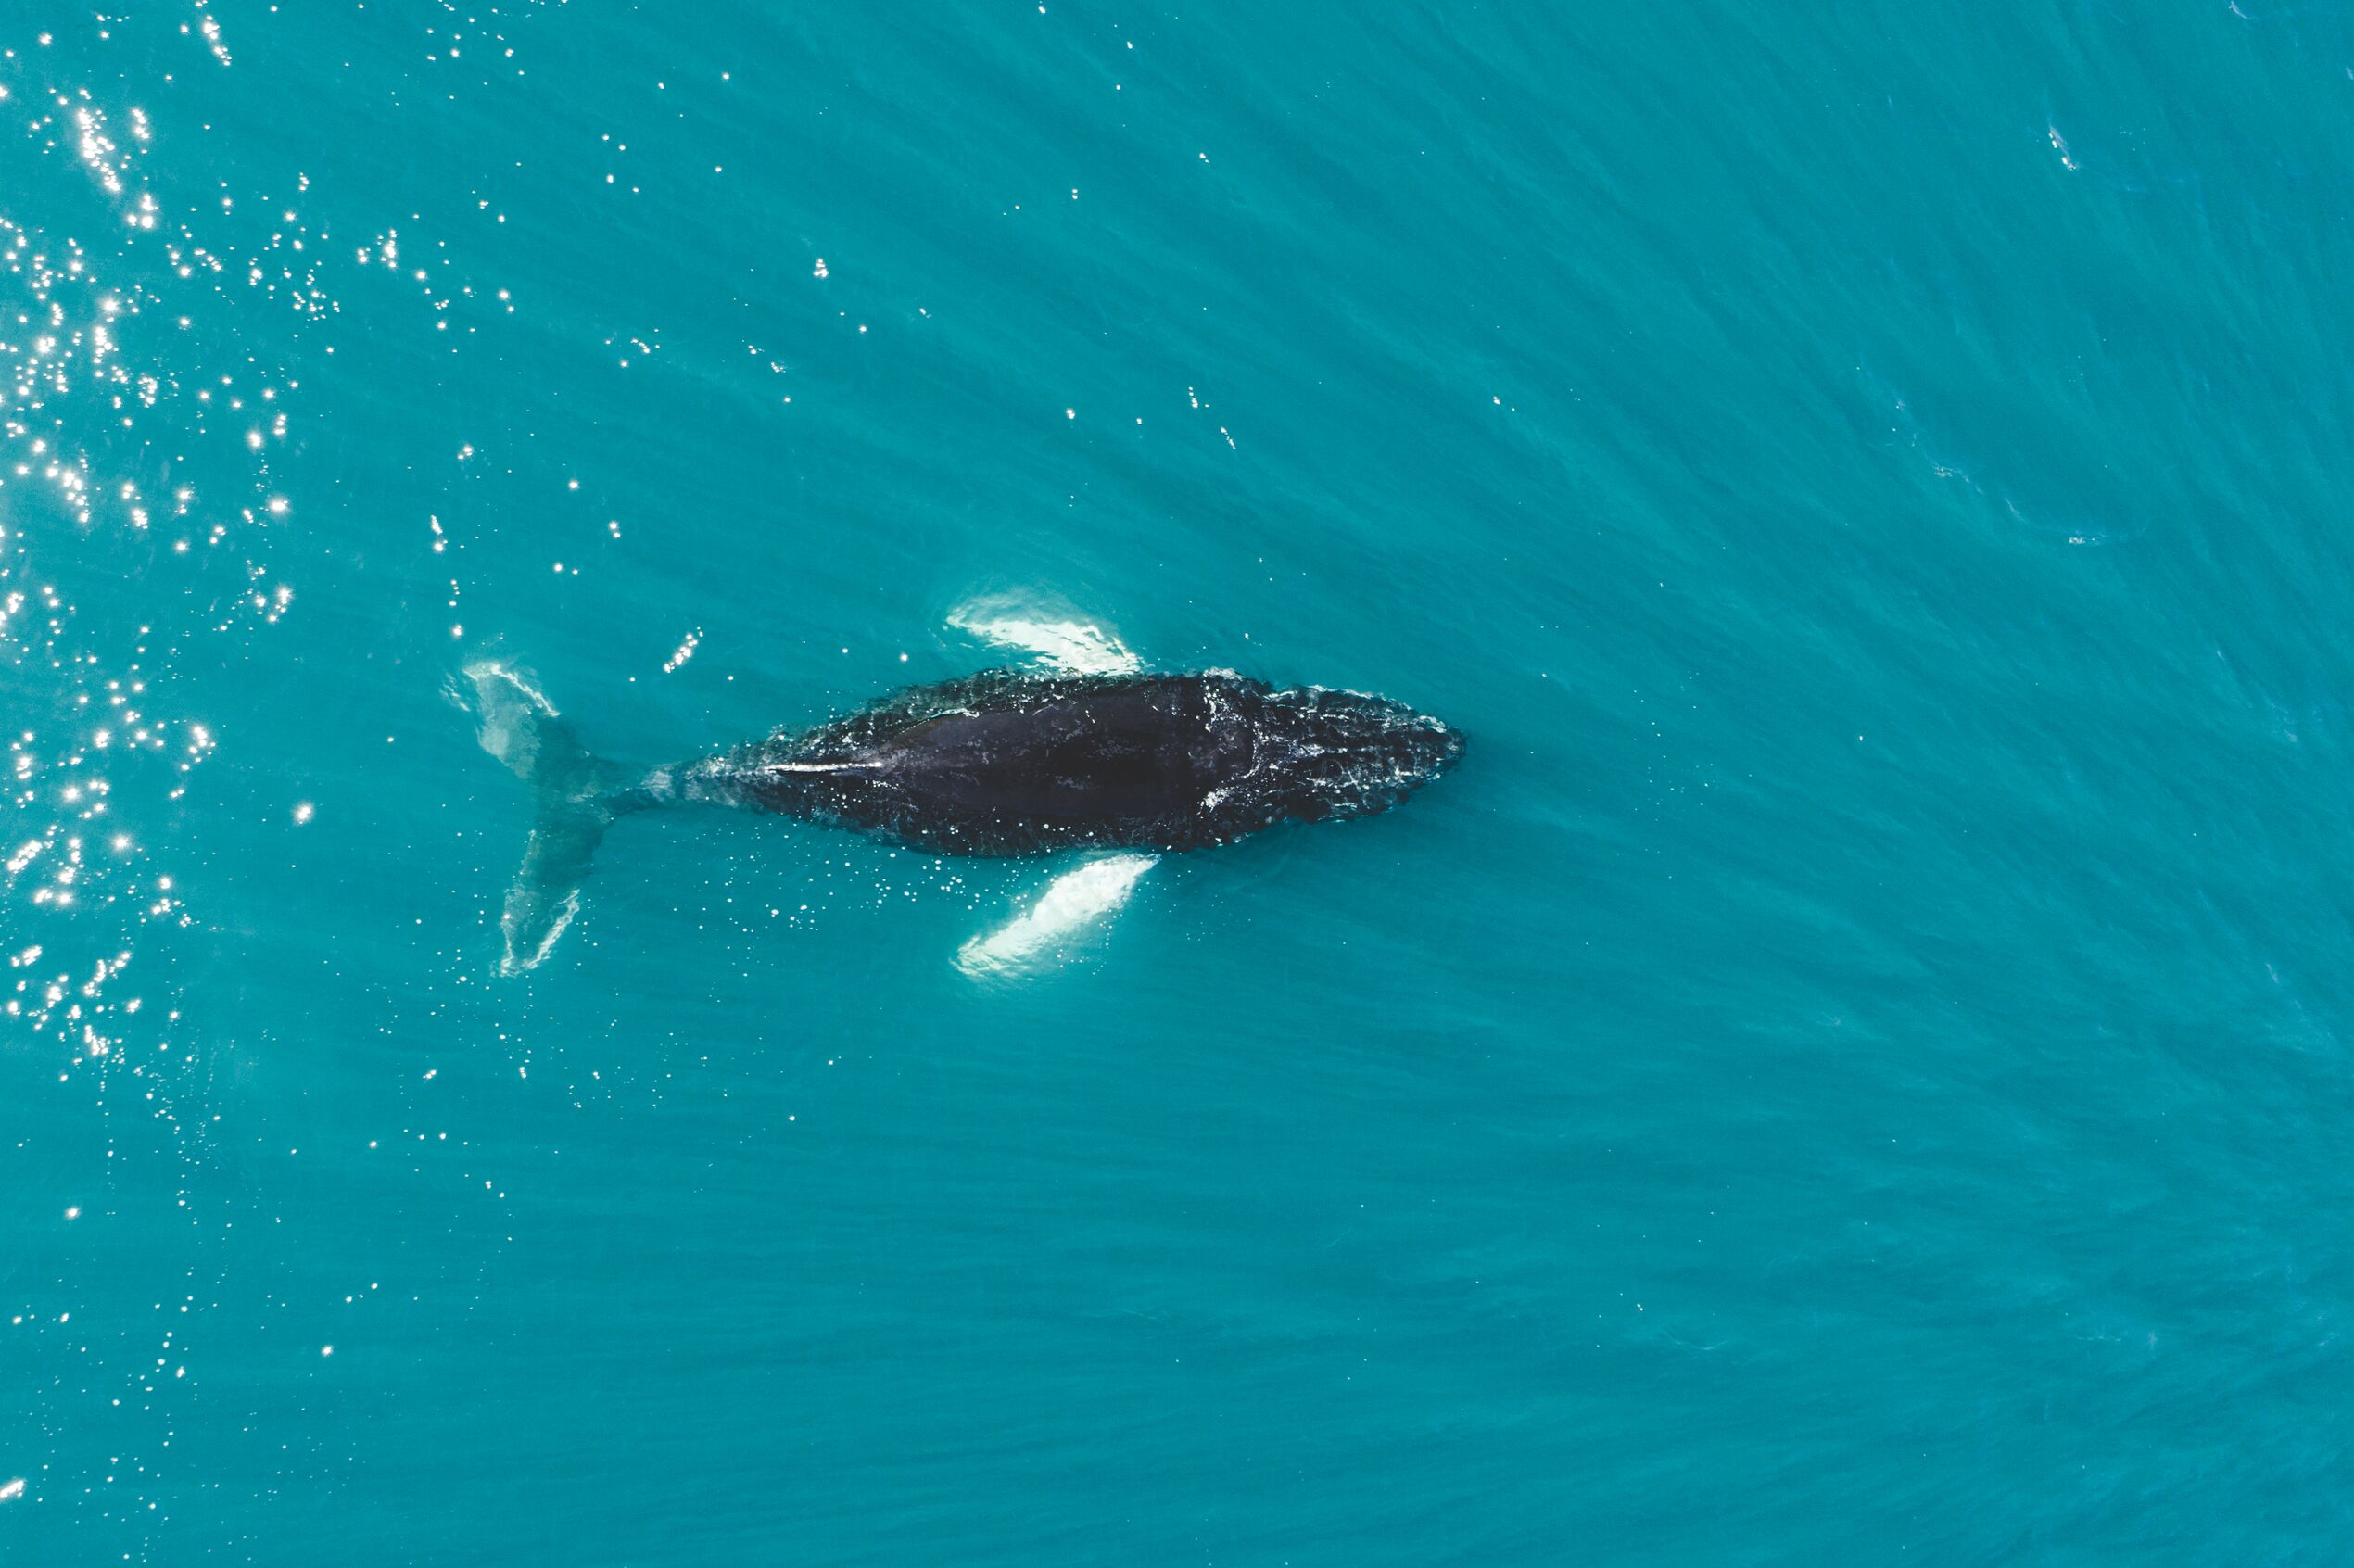 A drone image shows a whale swimming, close to the surface of blue water